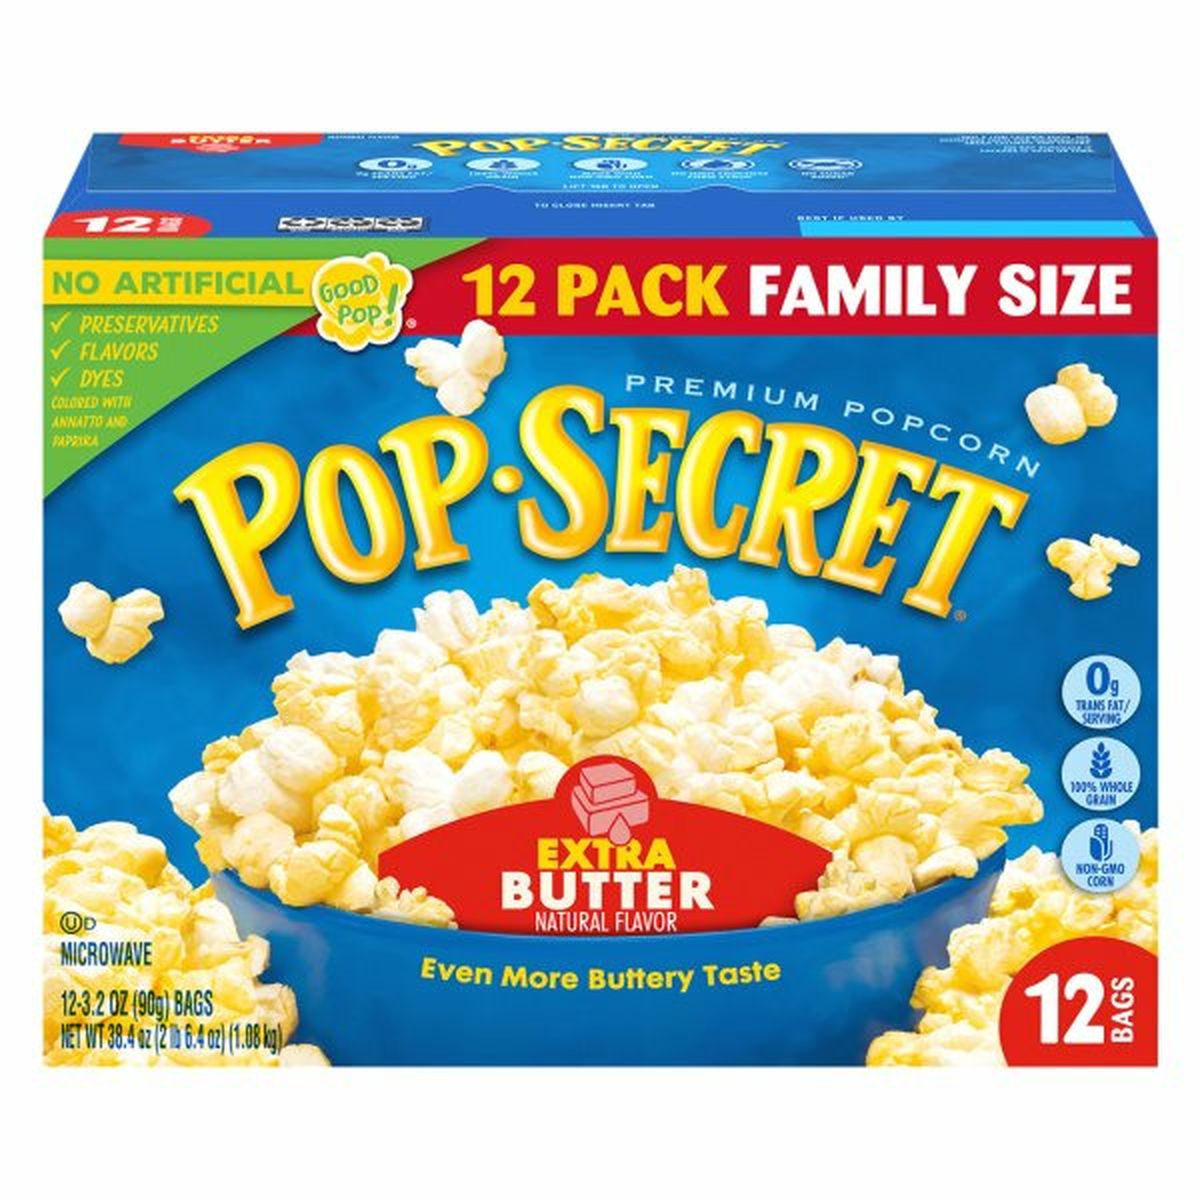 Calories in Pop Secret Popcorn, Extra Butter, Family Size, 12 Pack